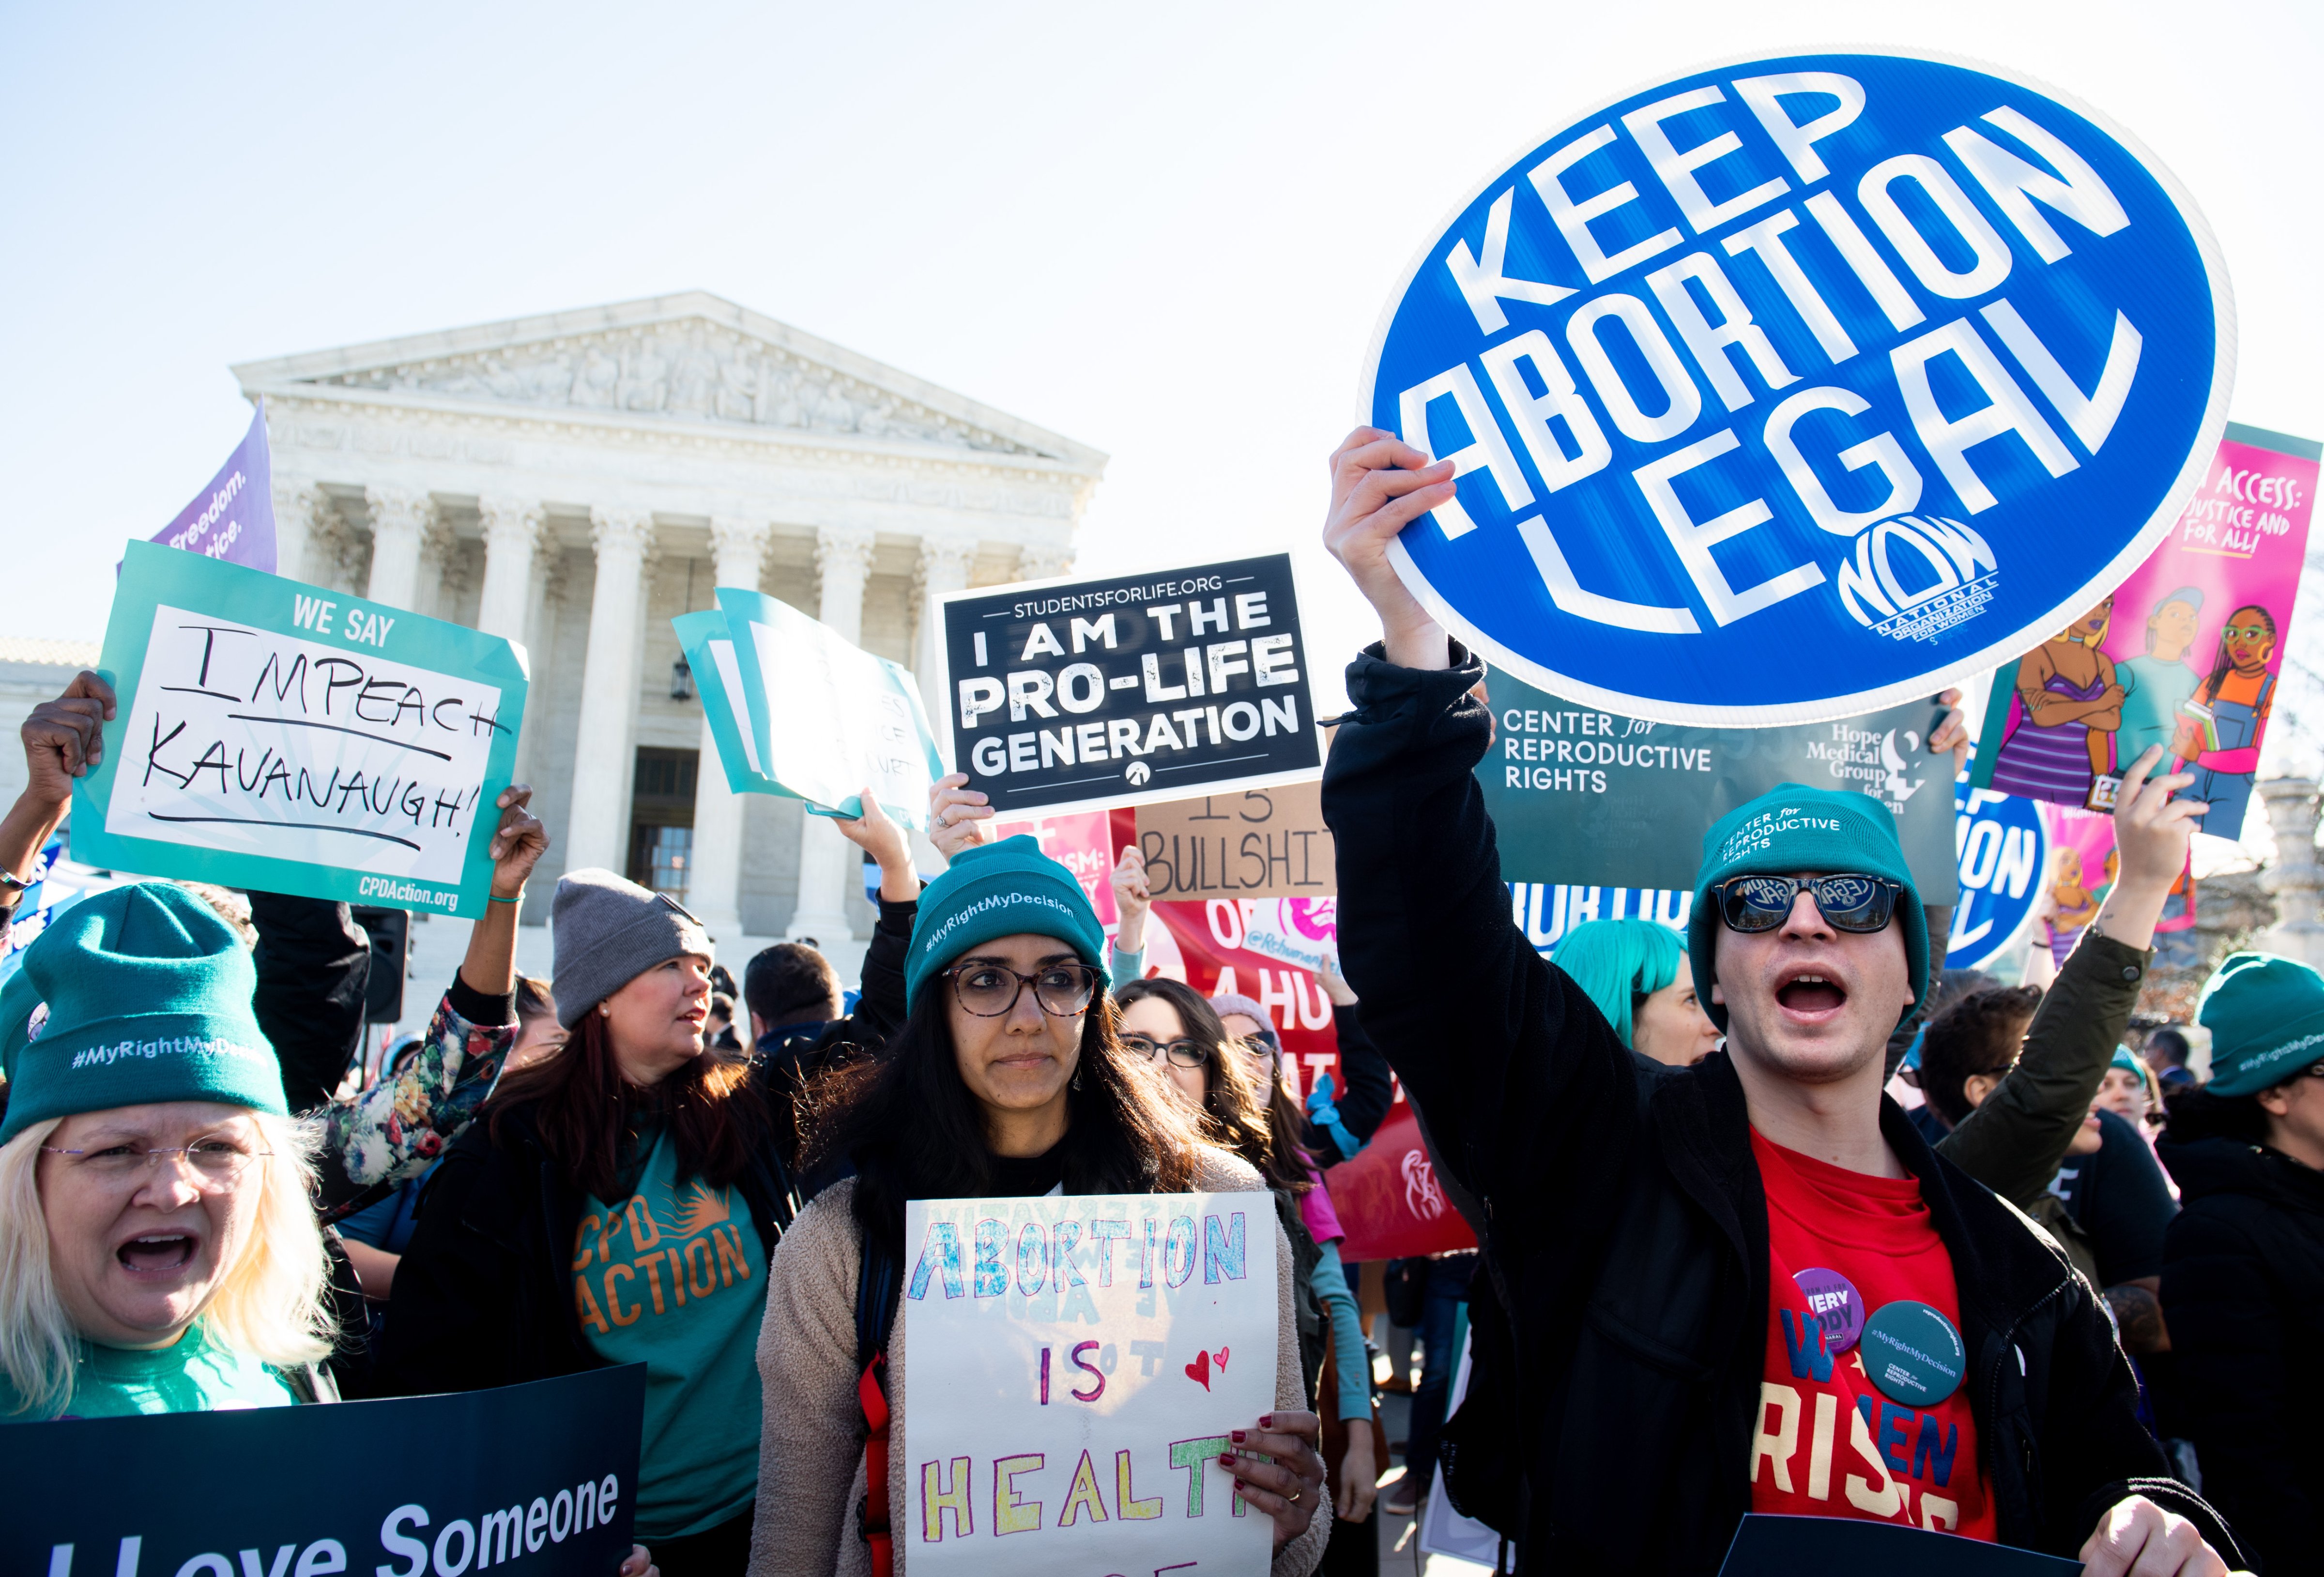 Abortion rights activists protest outside the U.S. Supreme Court in Washington, D.C., March 4. (Saul Loeb—AFP/Getty Images)